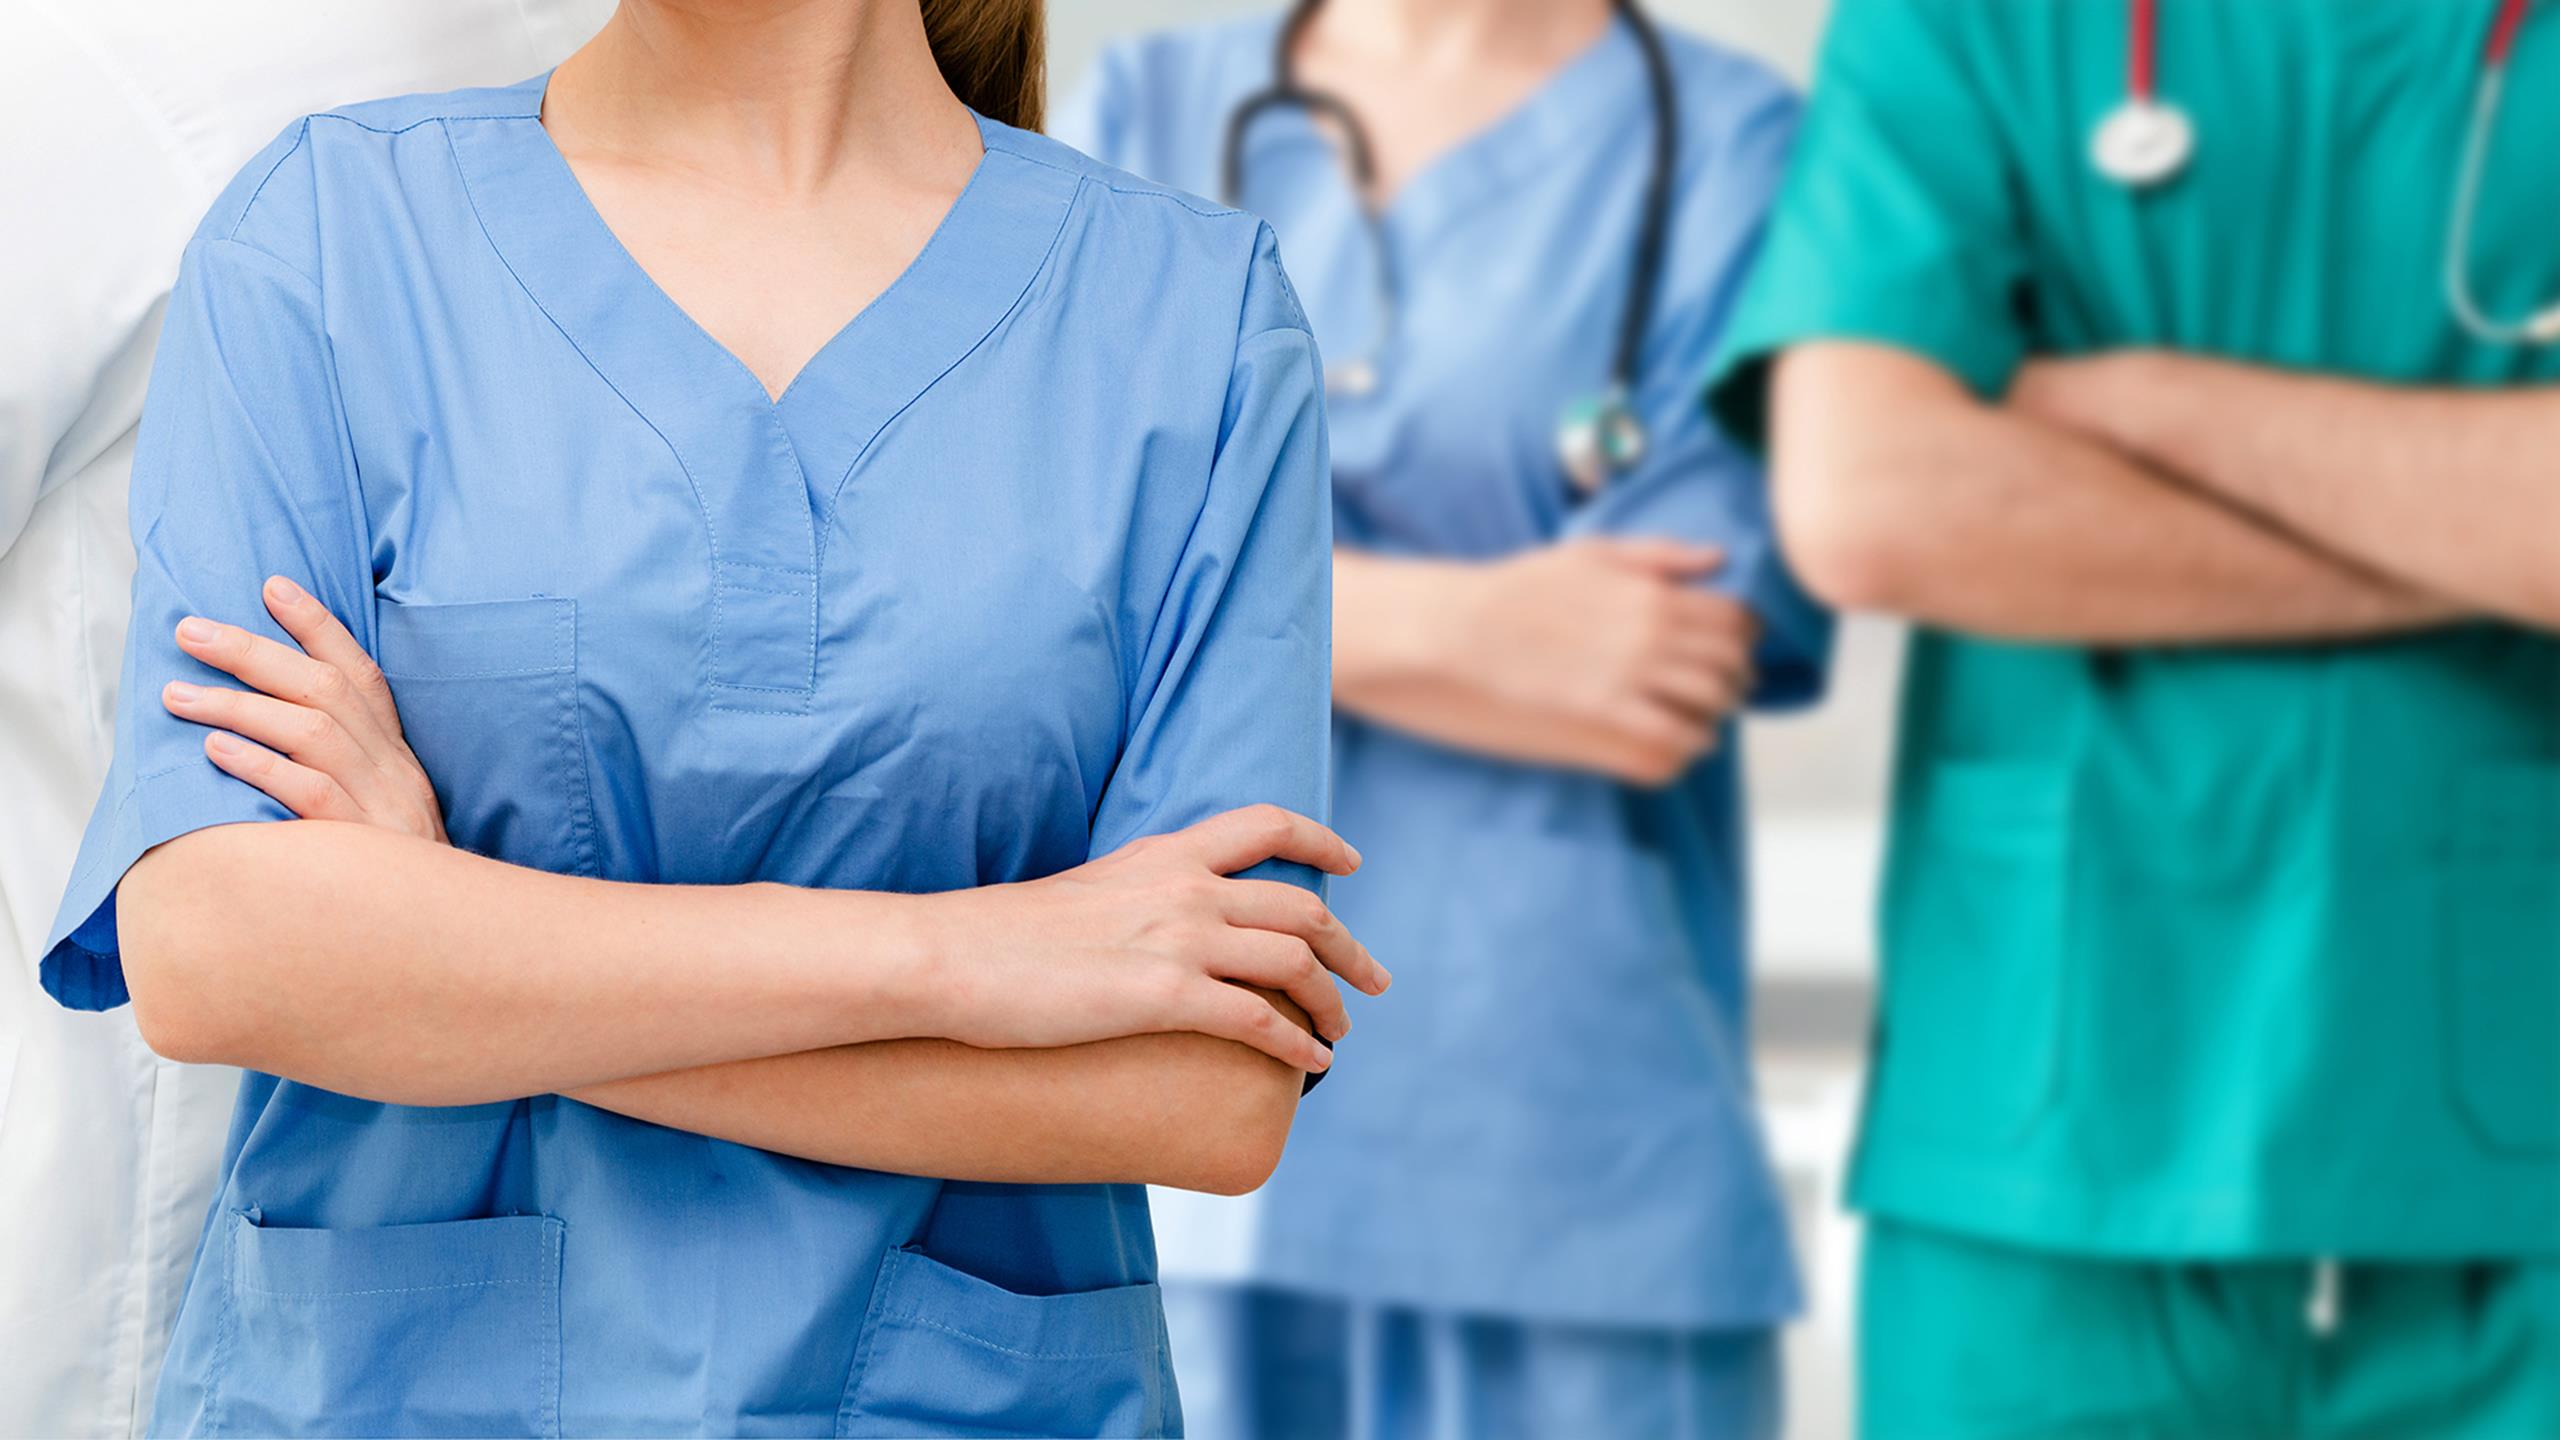 Students in clinical specialties uniforms